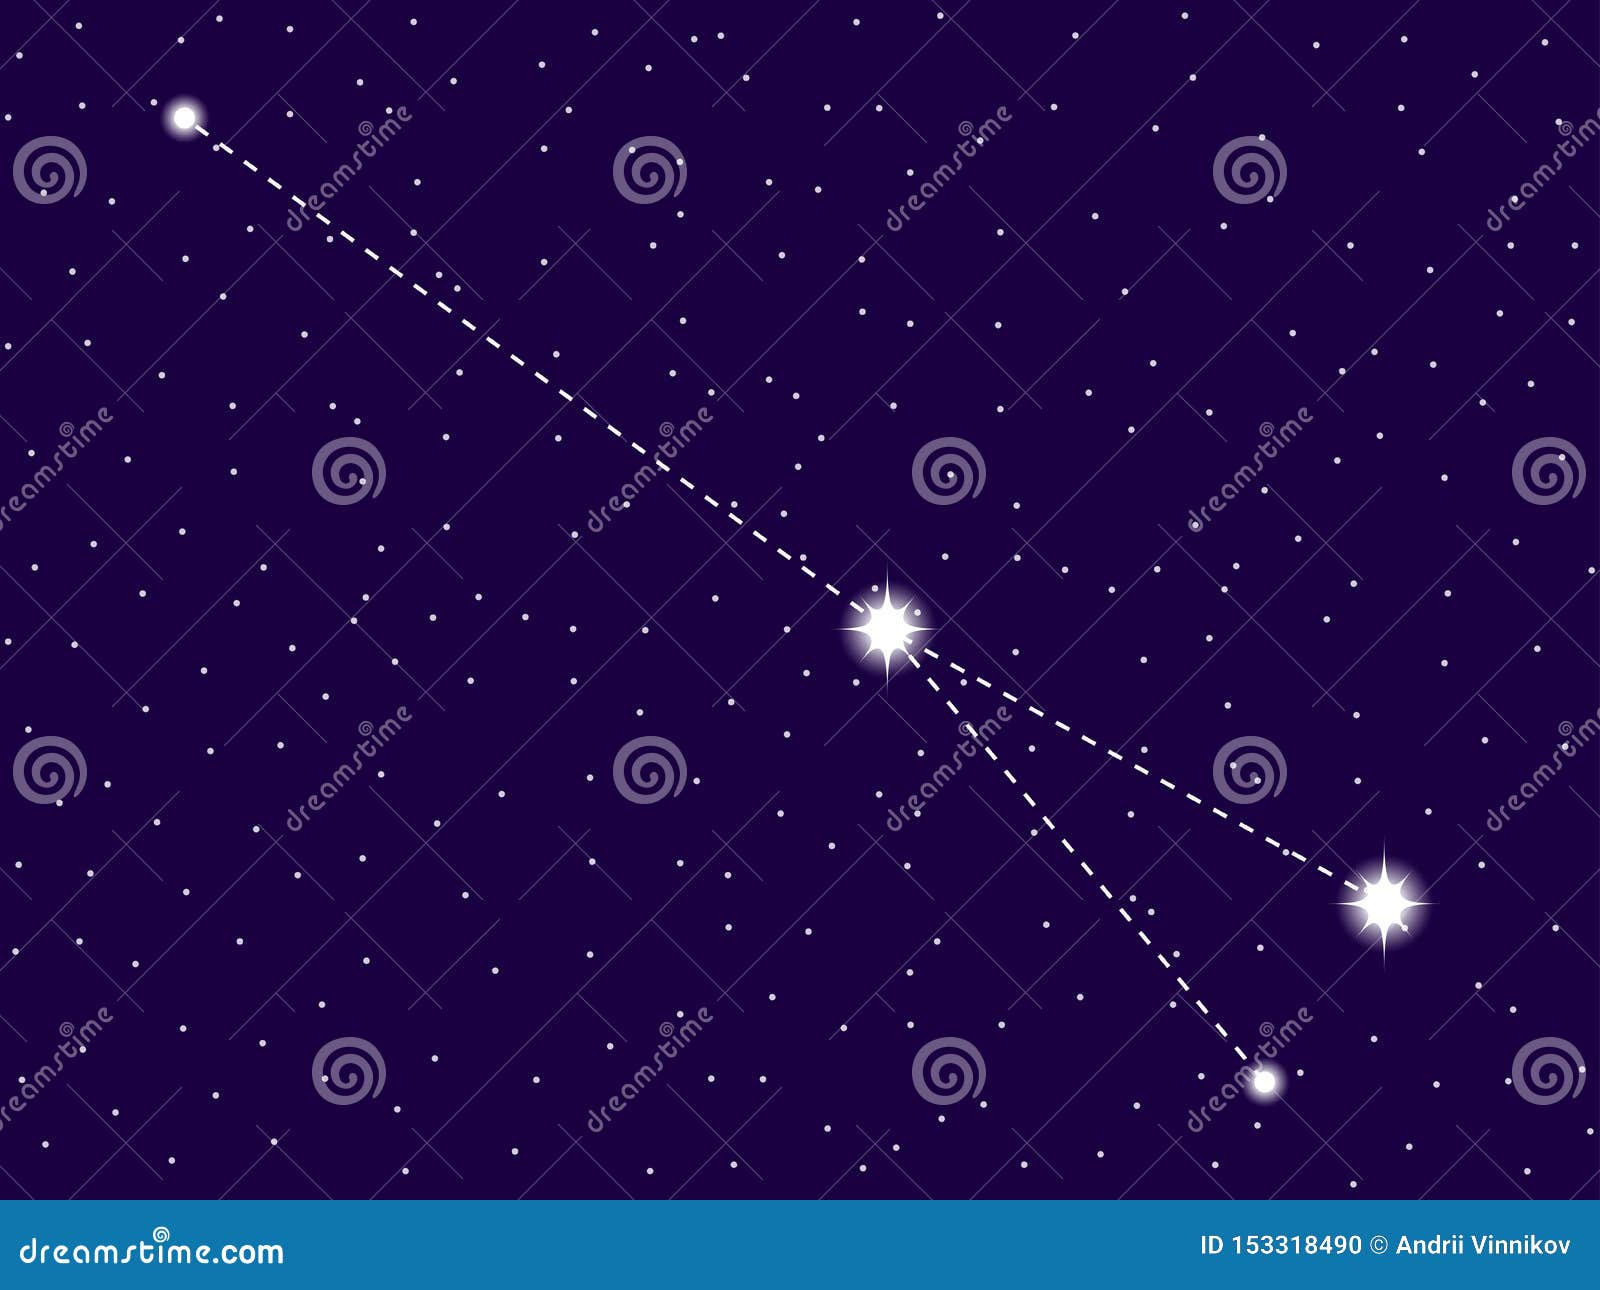 sagitta constellation. starry night sky. zodiac sign. cluster of stars and galaxies. deep space. 